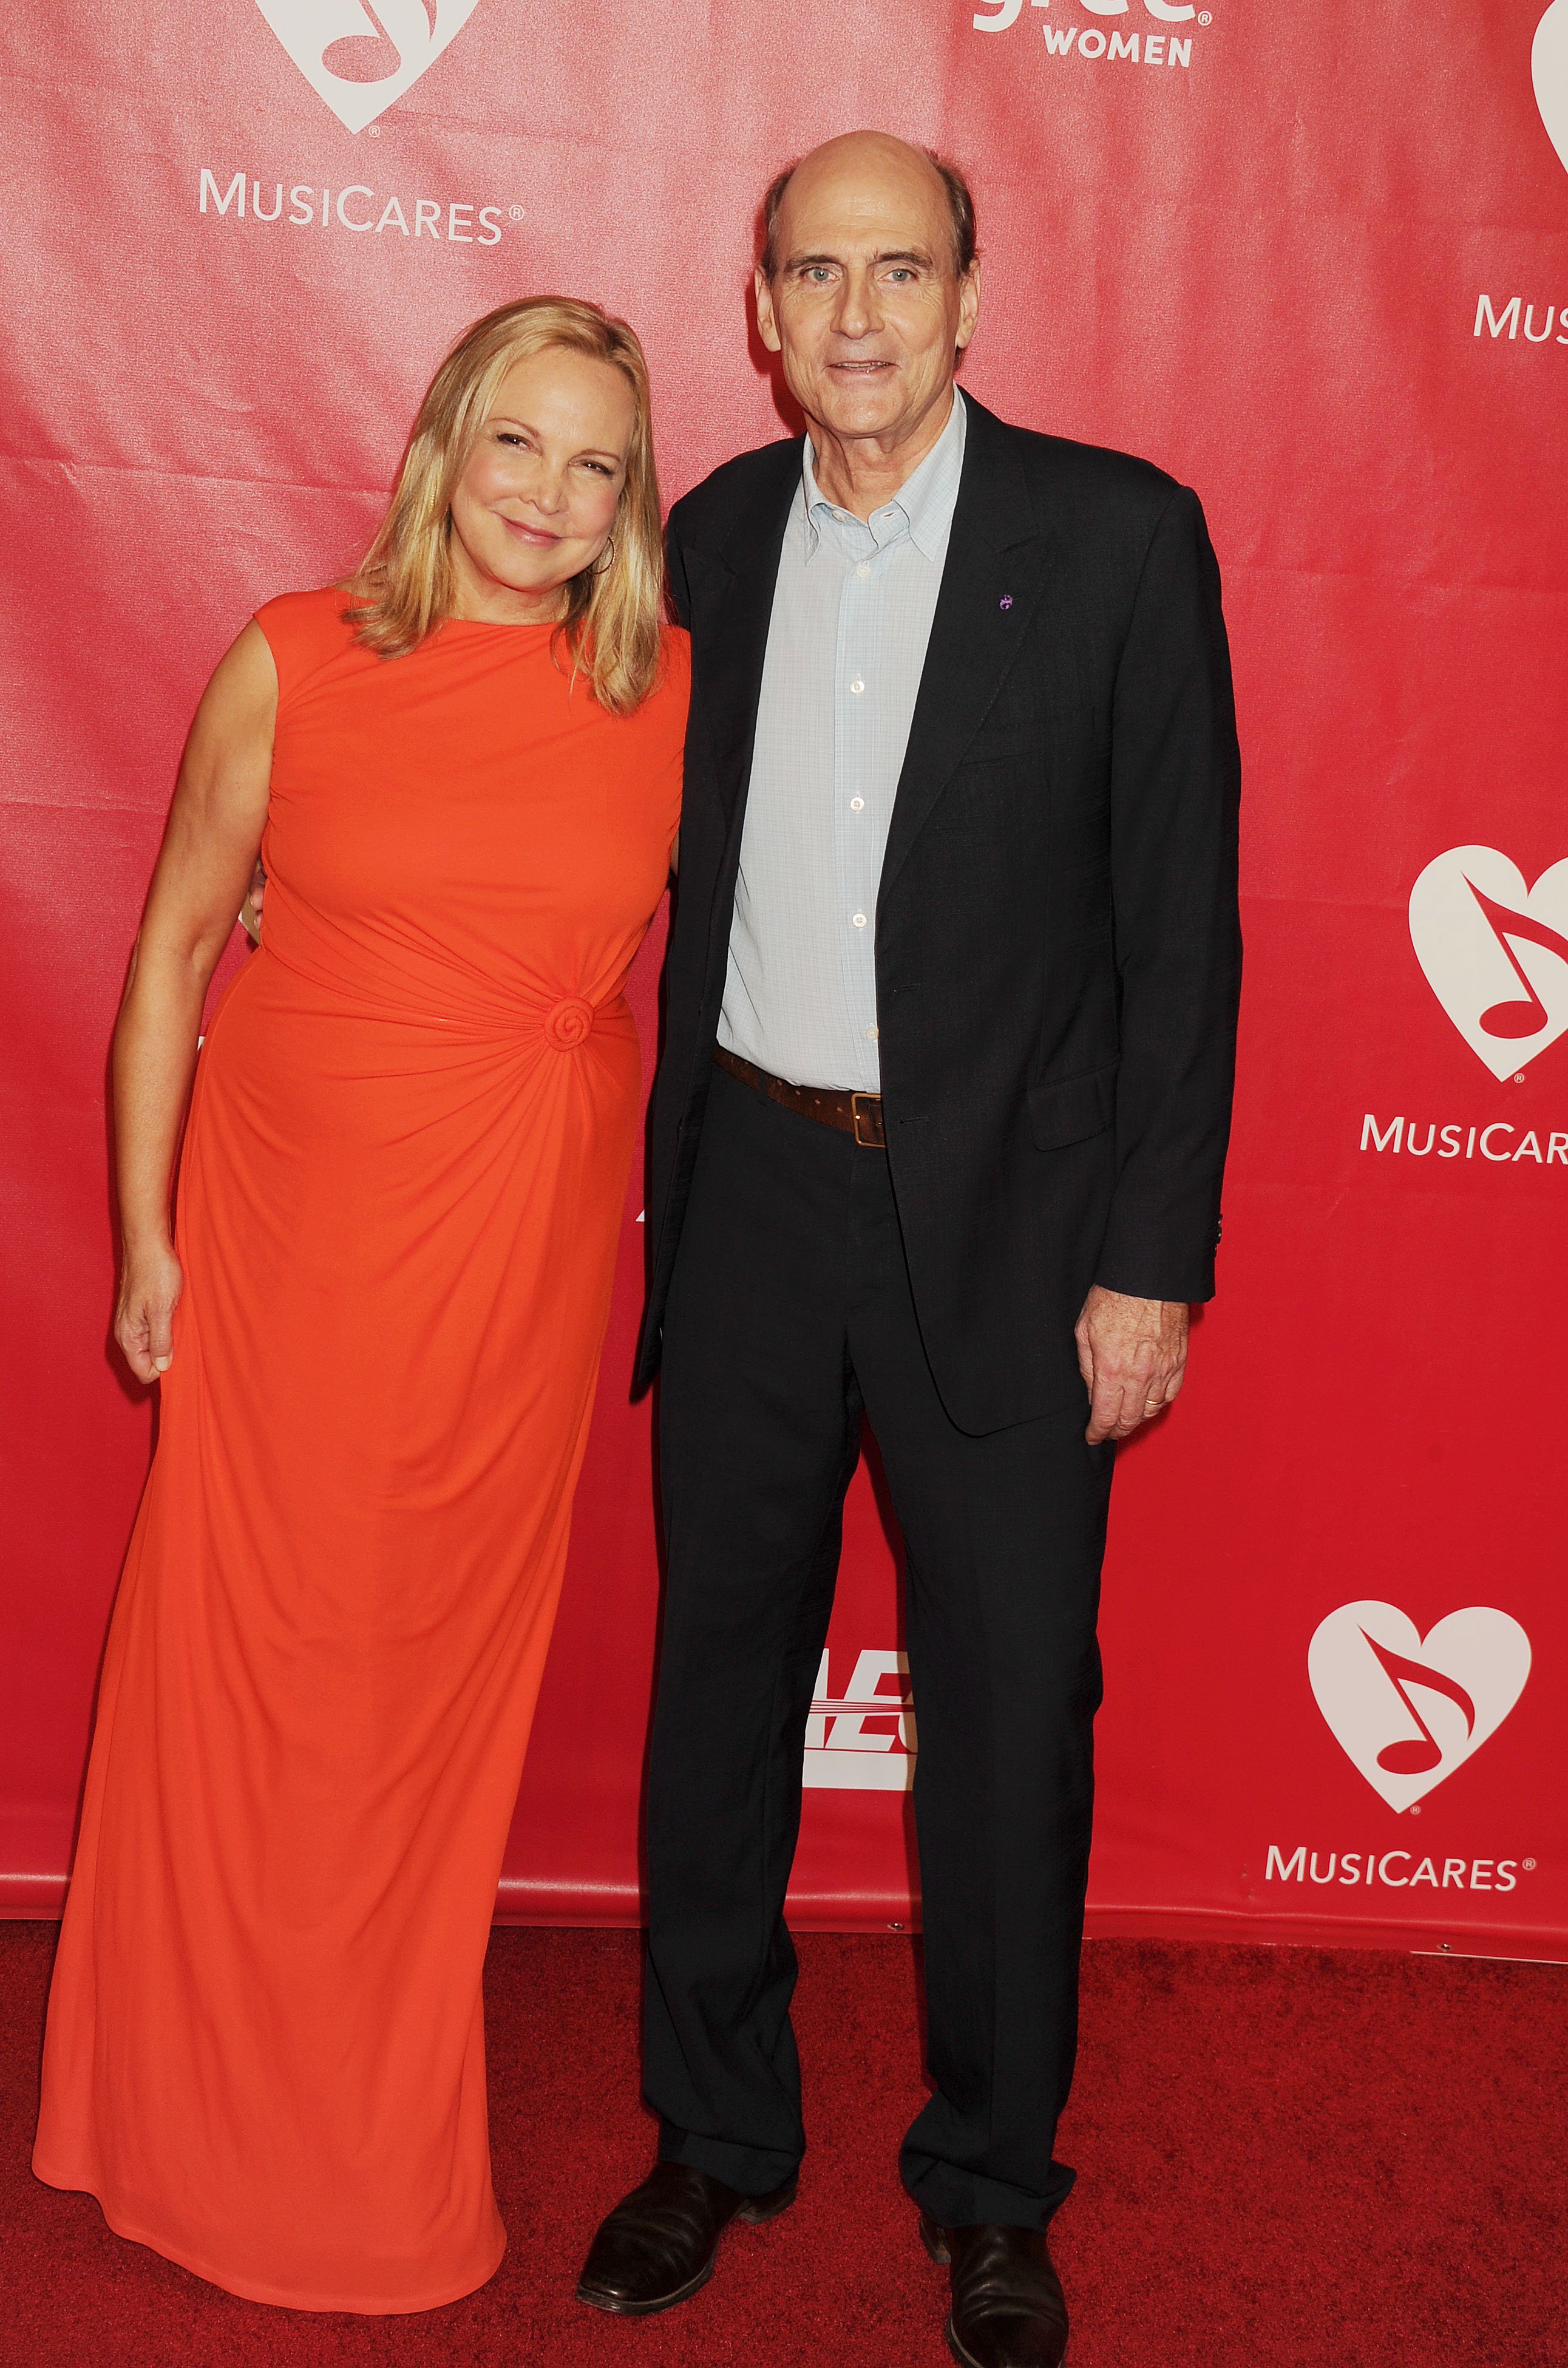 James Taylor and his wife, Caroline Smedvig, on April 17, 2014 in New York City | Source: Getty Images